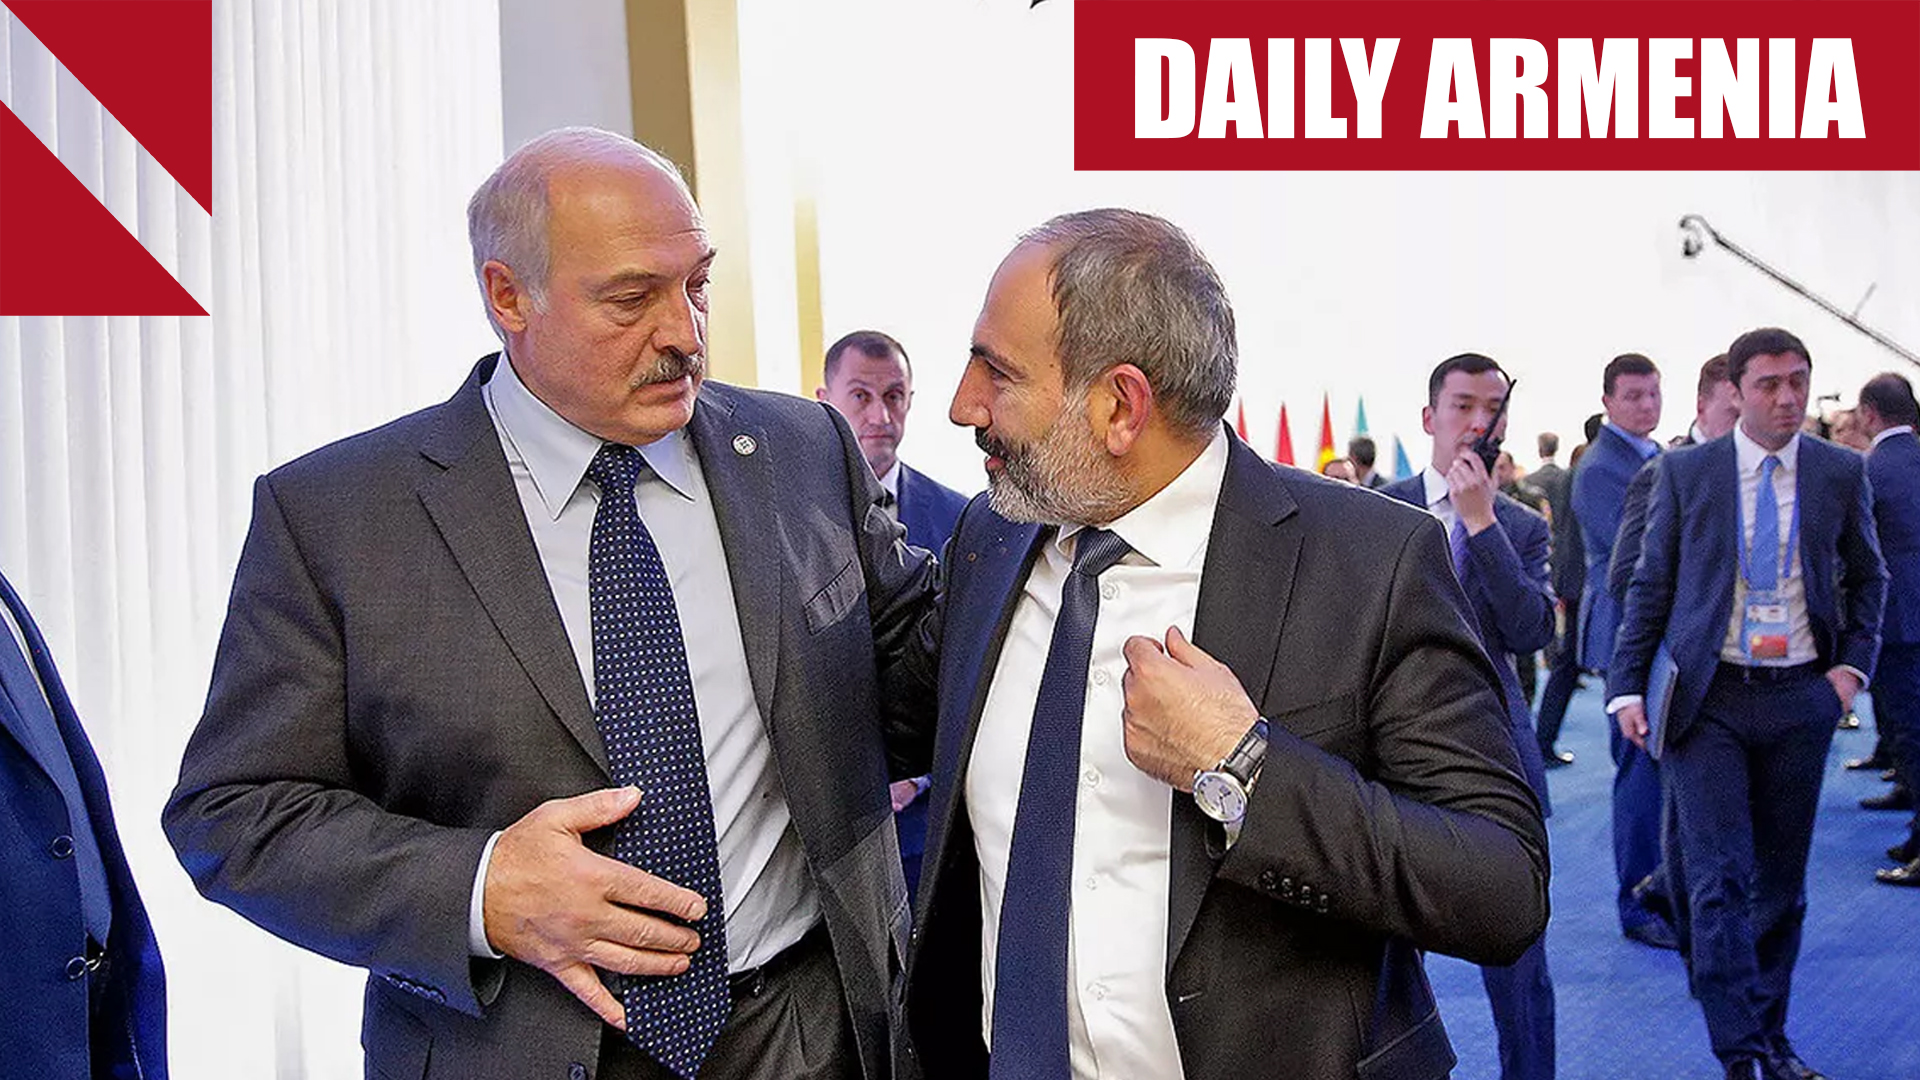 Pashinyan orders Armenian officials to refrain from visiting Belarus, as relations nosedive